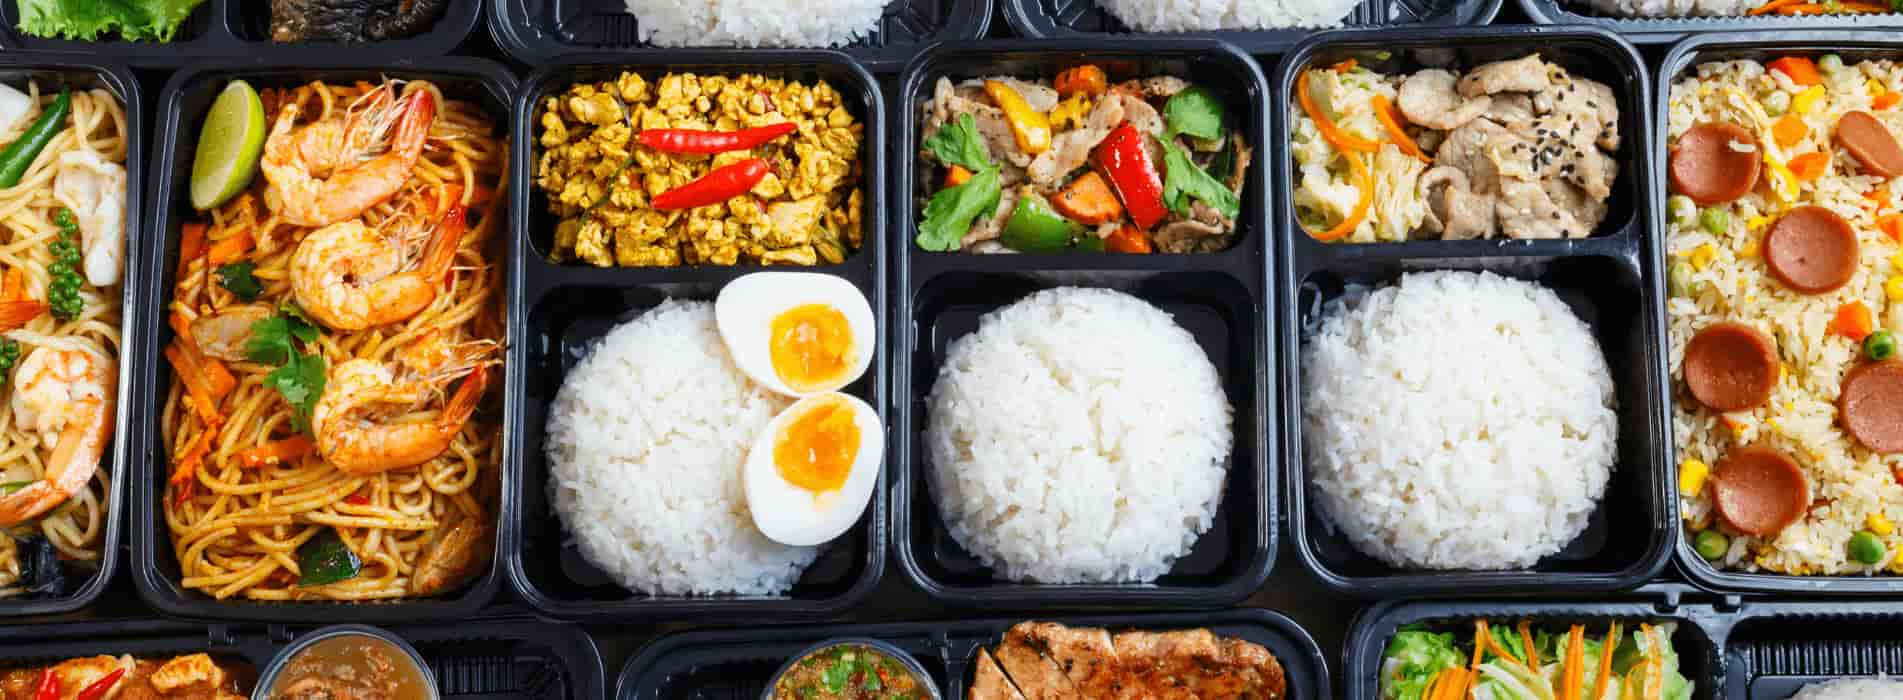 Healthy Meal Prep Ideas To Lose Weight